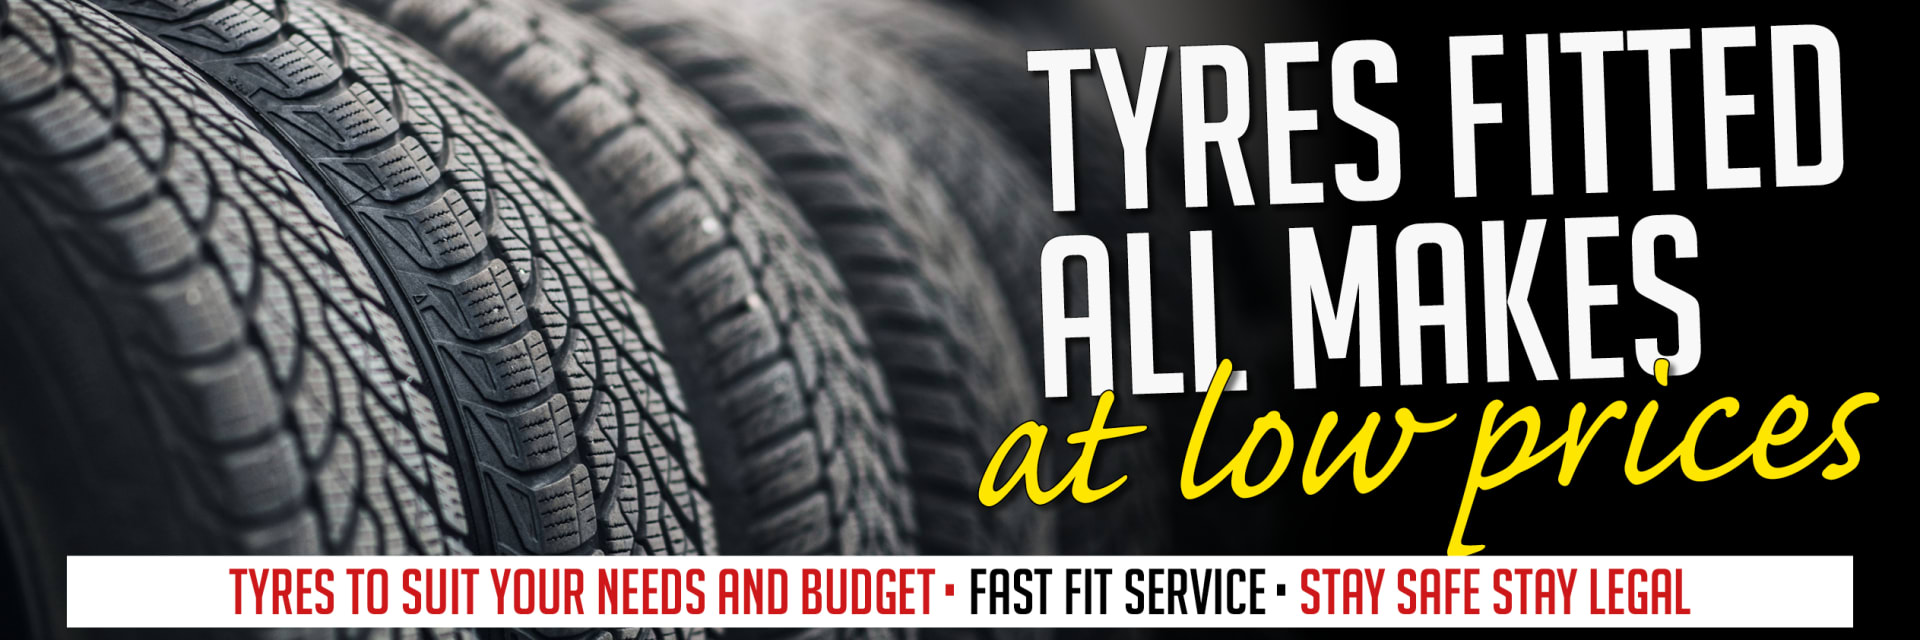 Tyres Helpful Information to keep you on the road